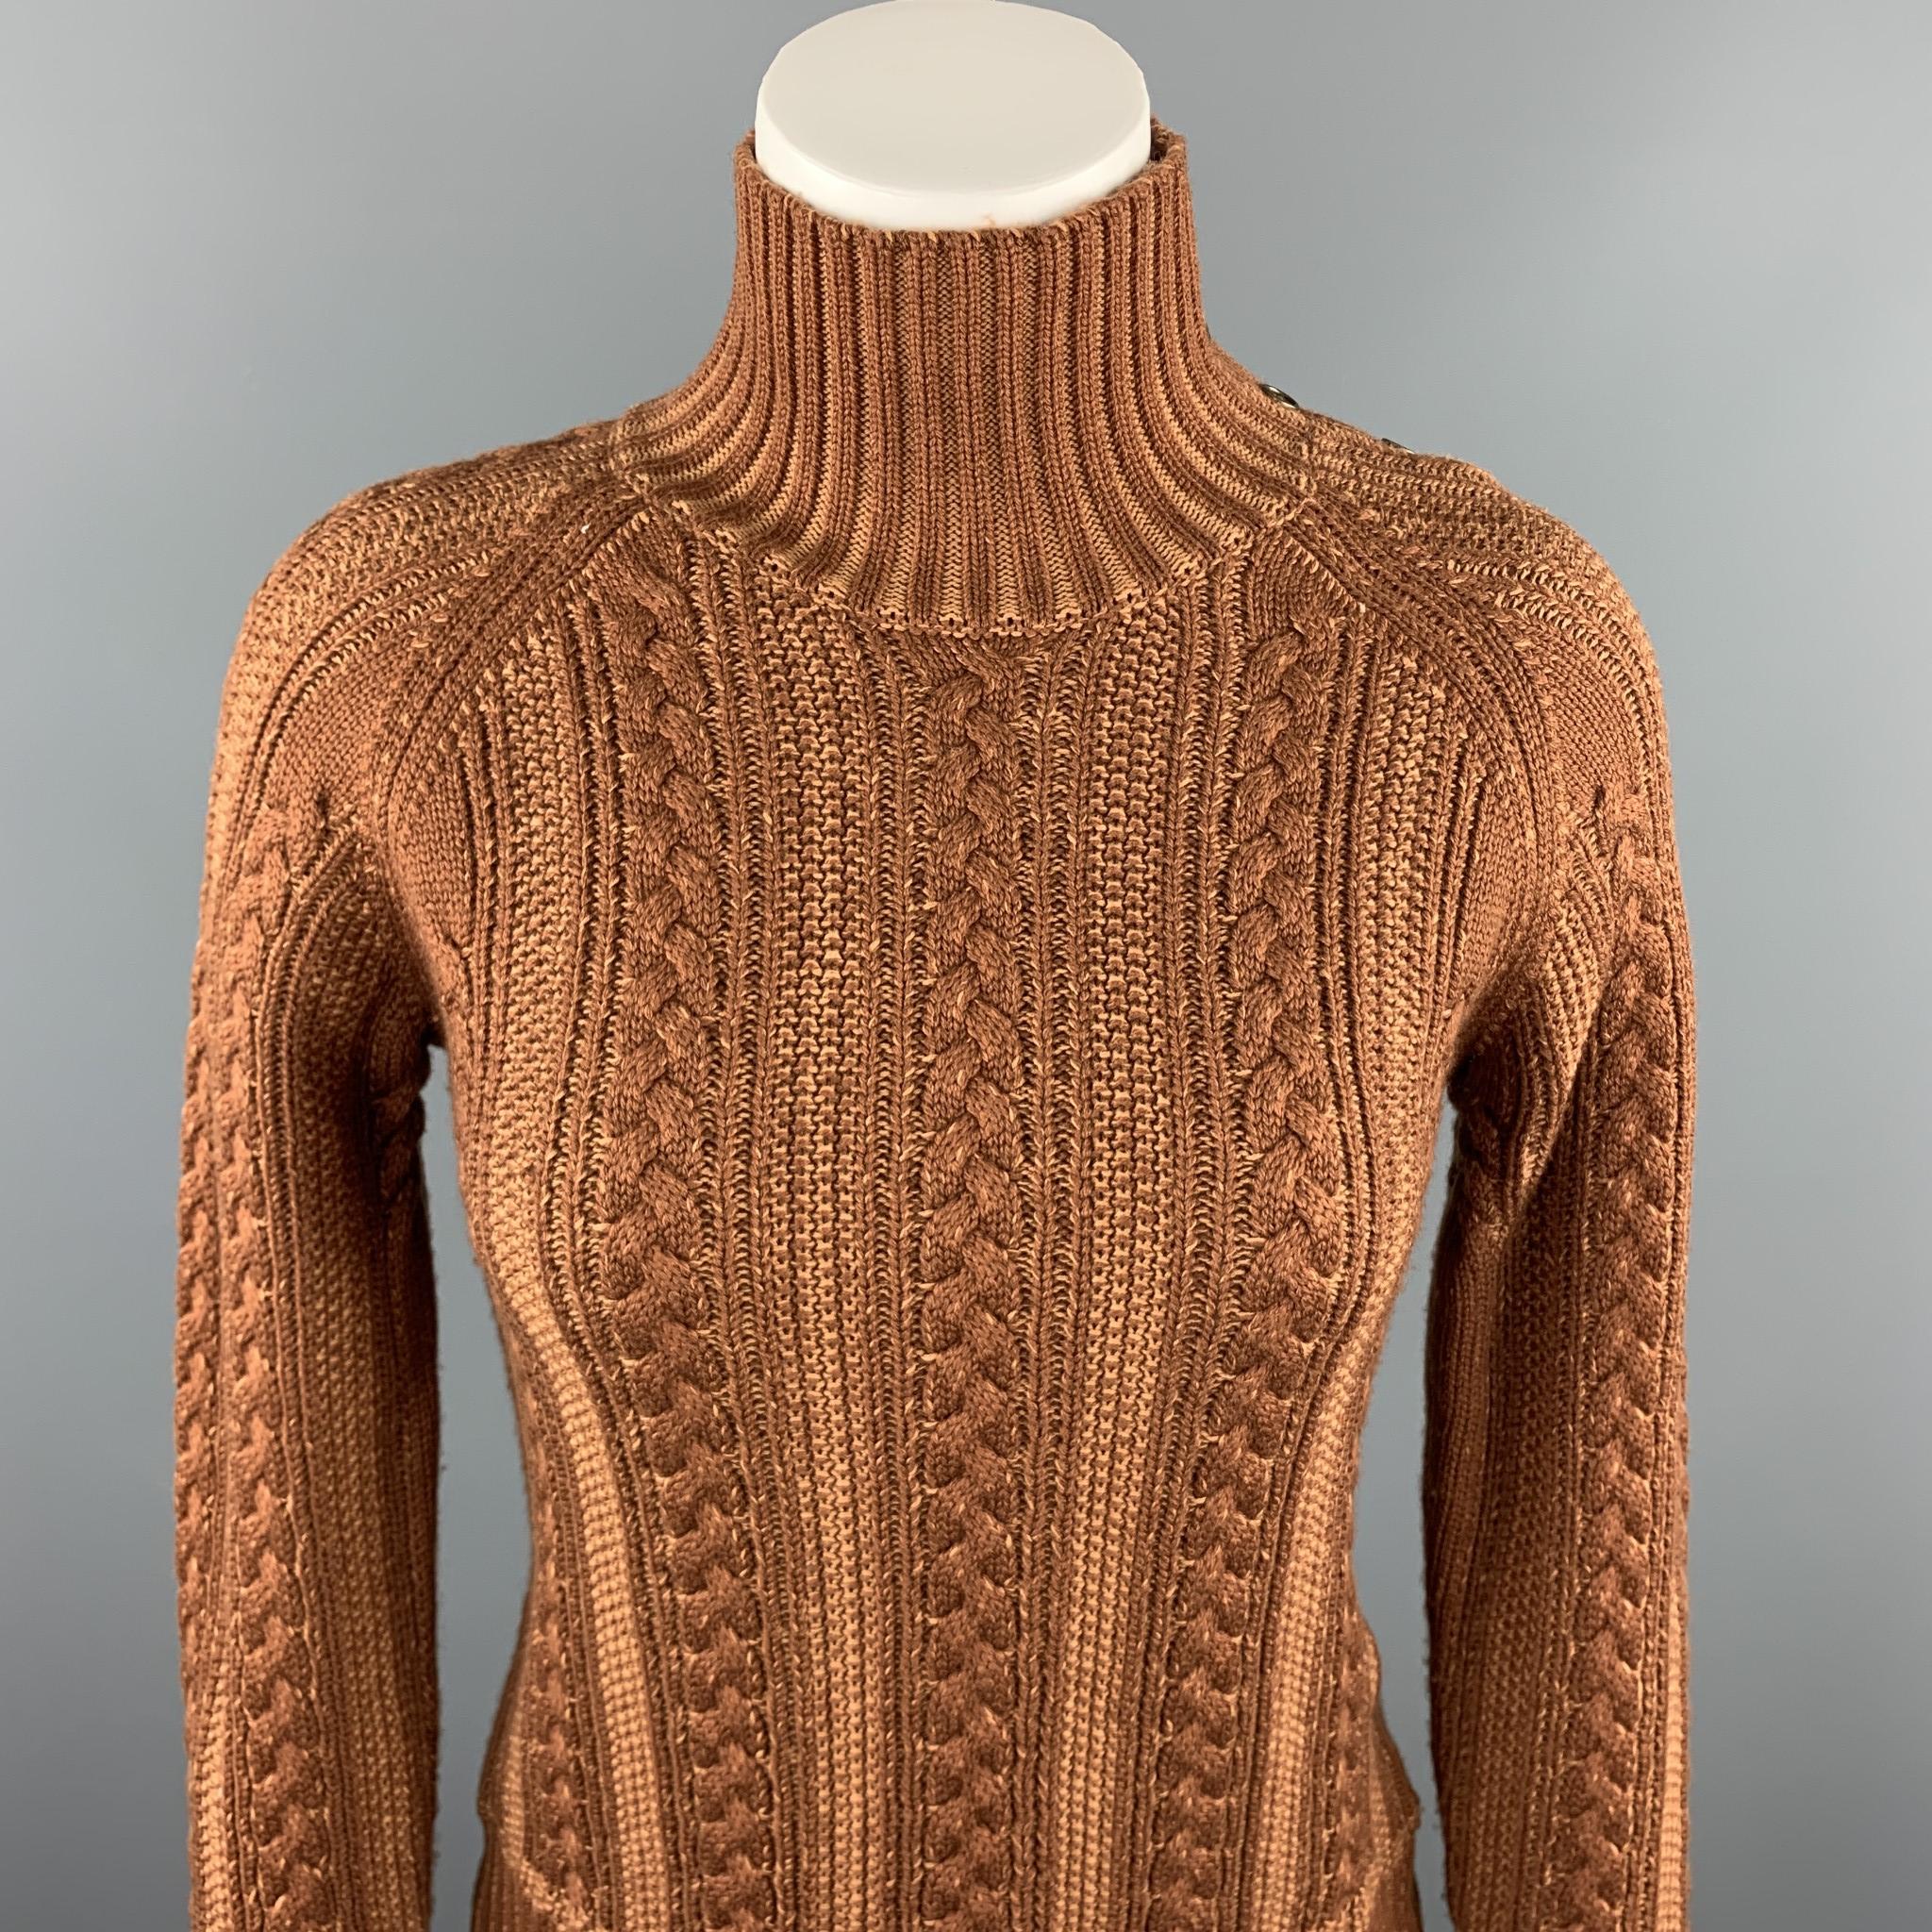 BURBERRY sweater comes in a brown cable knit wool / cotton featuring a high collar and a side button detail.

Excellent Pre-Owned Condition.
Marked: No size marked

Measurements:

Shoulder: 16.5 in. 
Bust: 32 in. 
Sleeve: 24 in. 
Length: 20 in. 